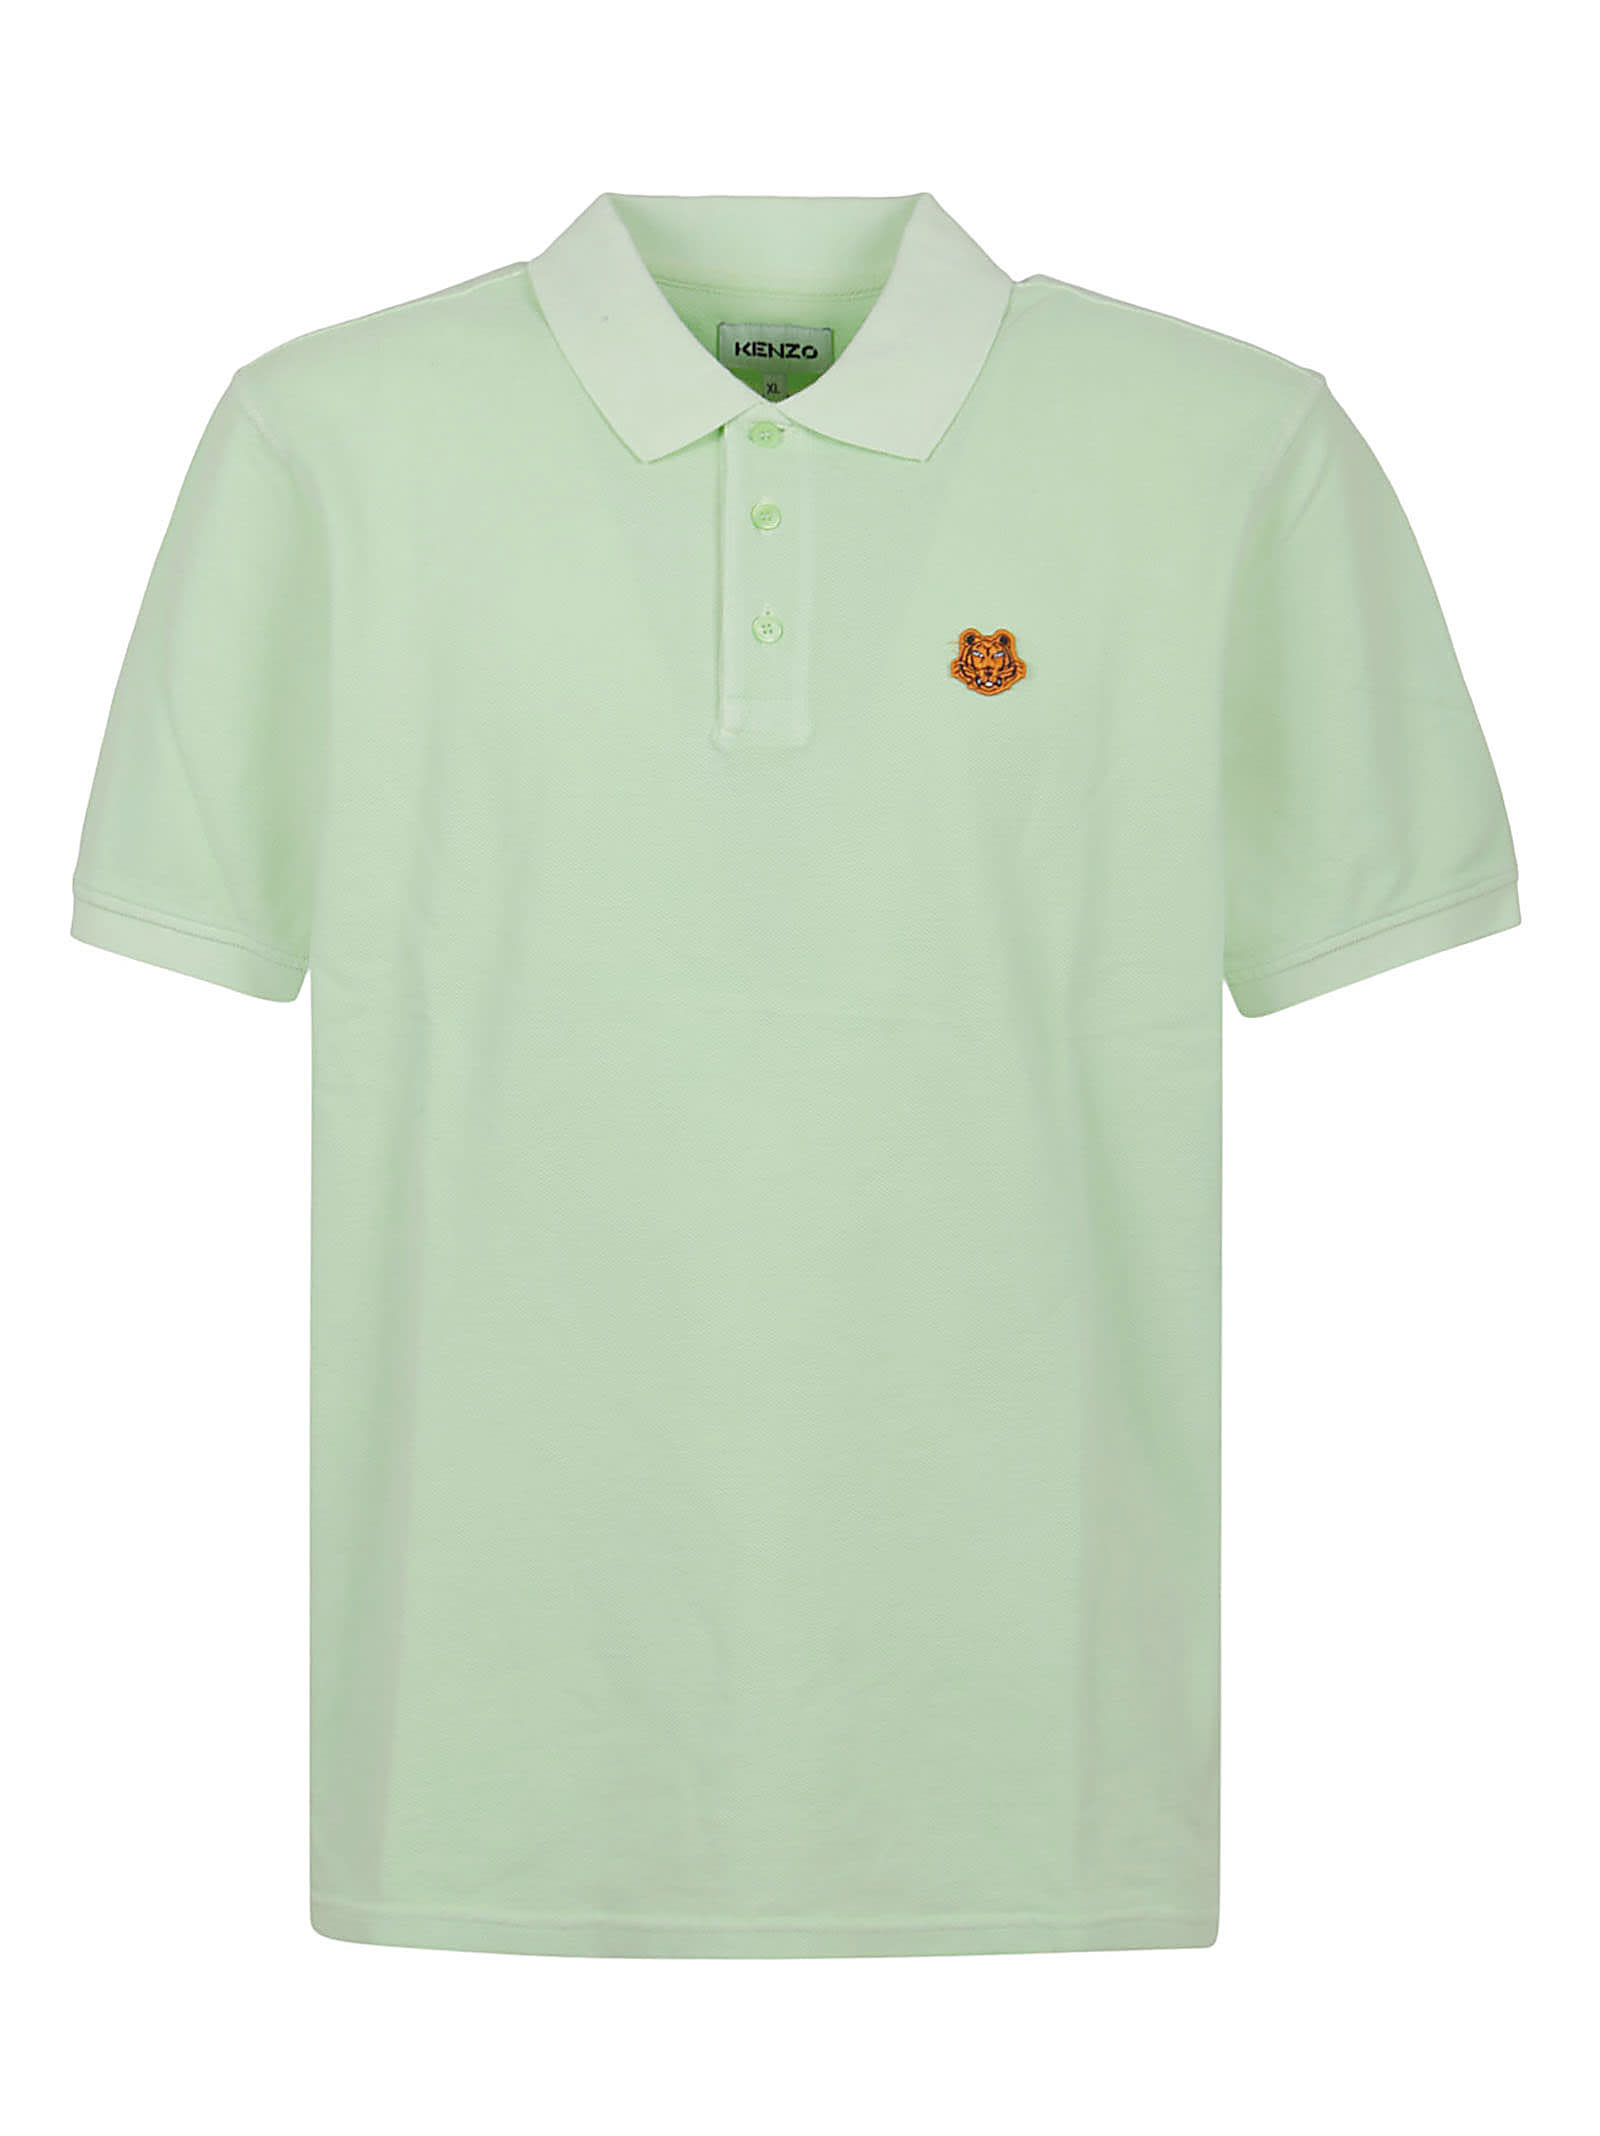 Kenzo Tiger Crest Kfit Polo